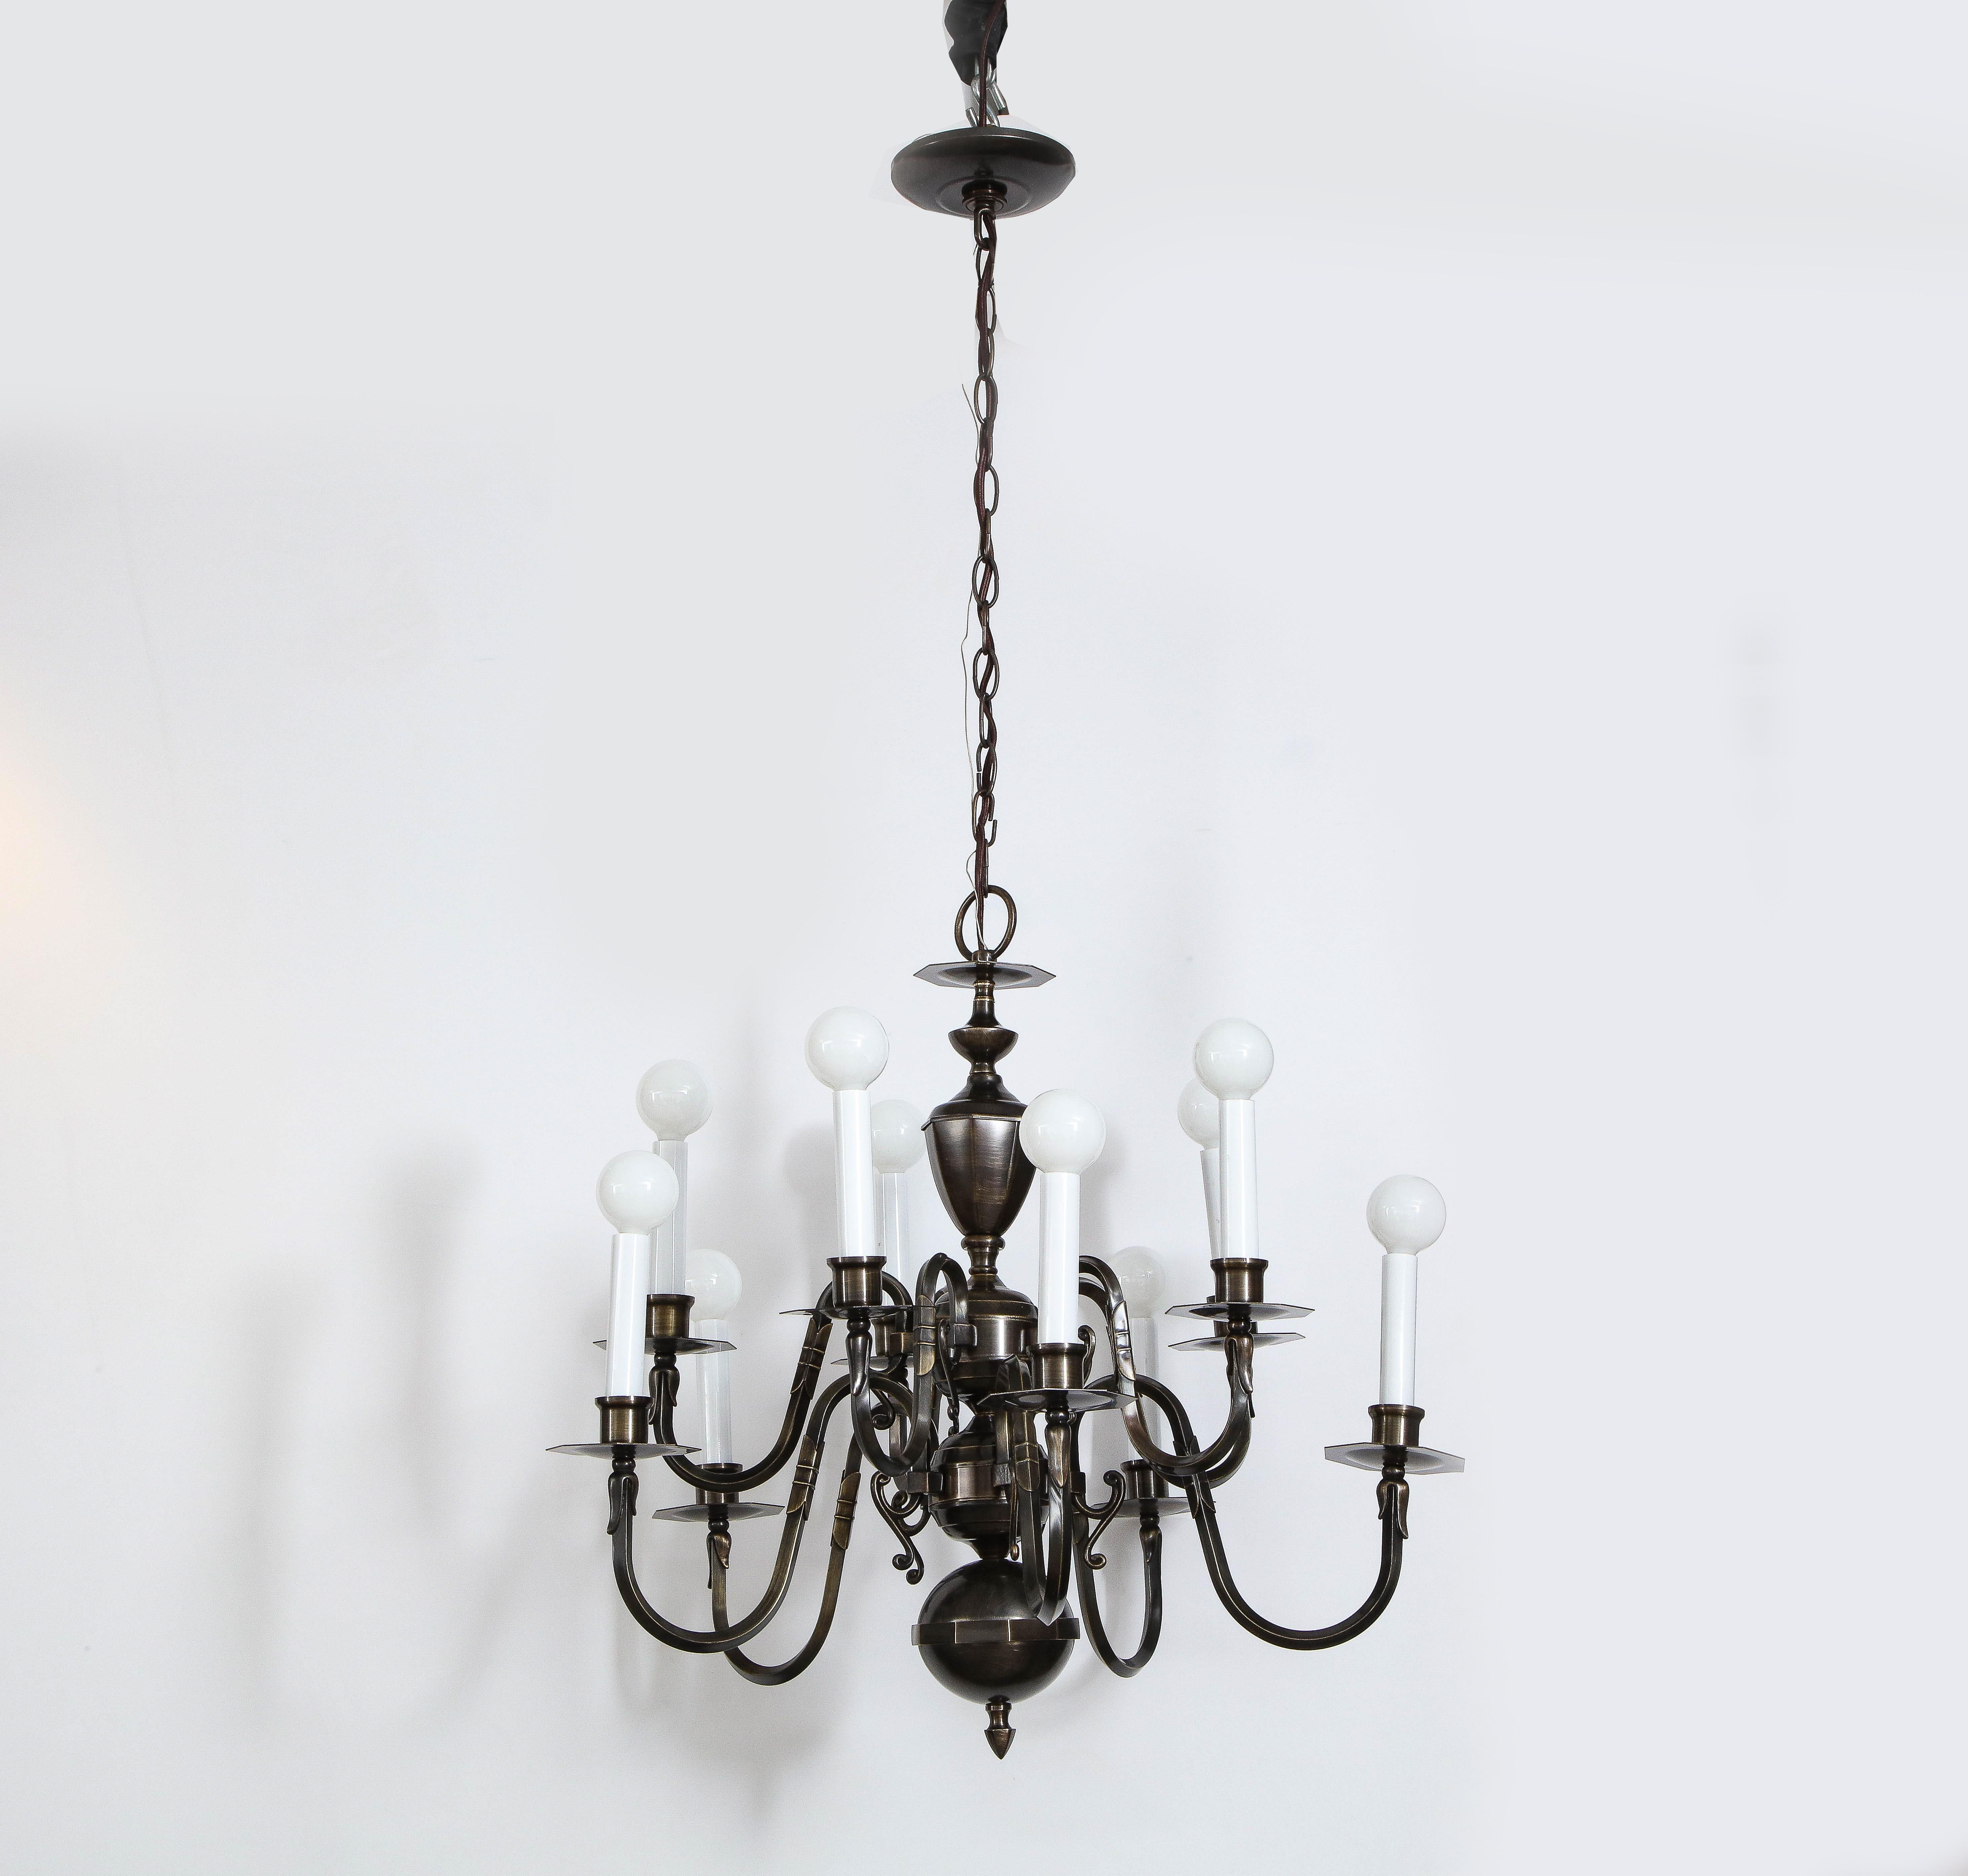 American Art Deco 12 arm hand forged dark bronze chandelier. 3 segemented faceted sphere segments compose the body and 12 graceful arms extend outwards. Rewired for use in the USA, shown here with globe chandelier bulbs.

As shown 42 inches in